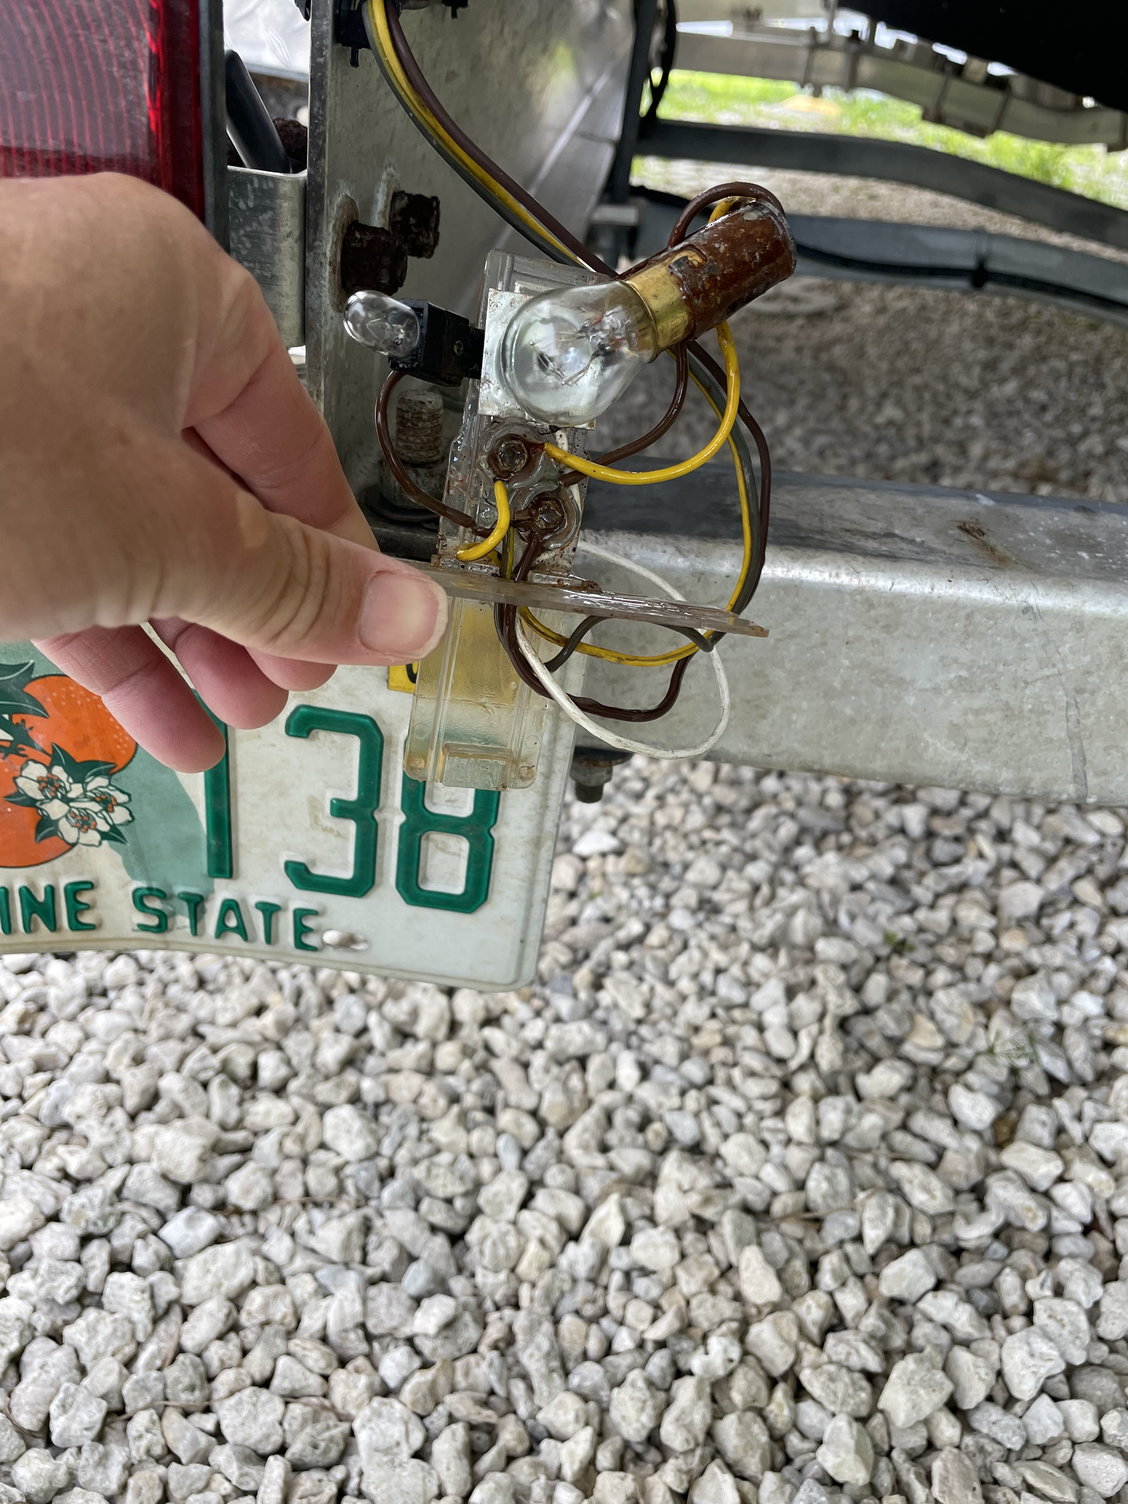 Help Decoding Trailer Wires - The Hull Truth - Boating and Fishing Forum